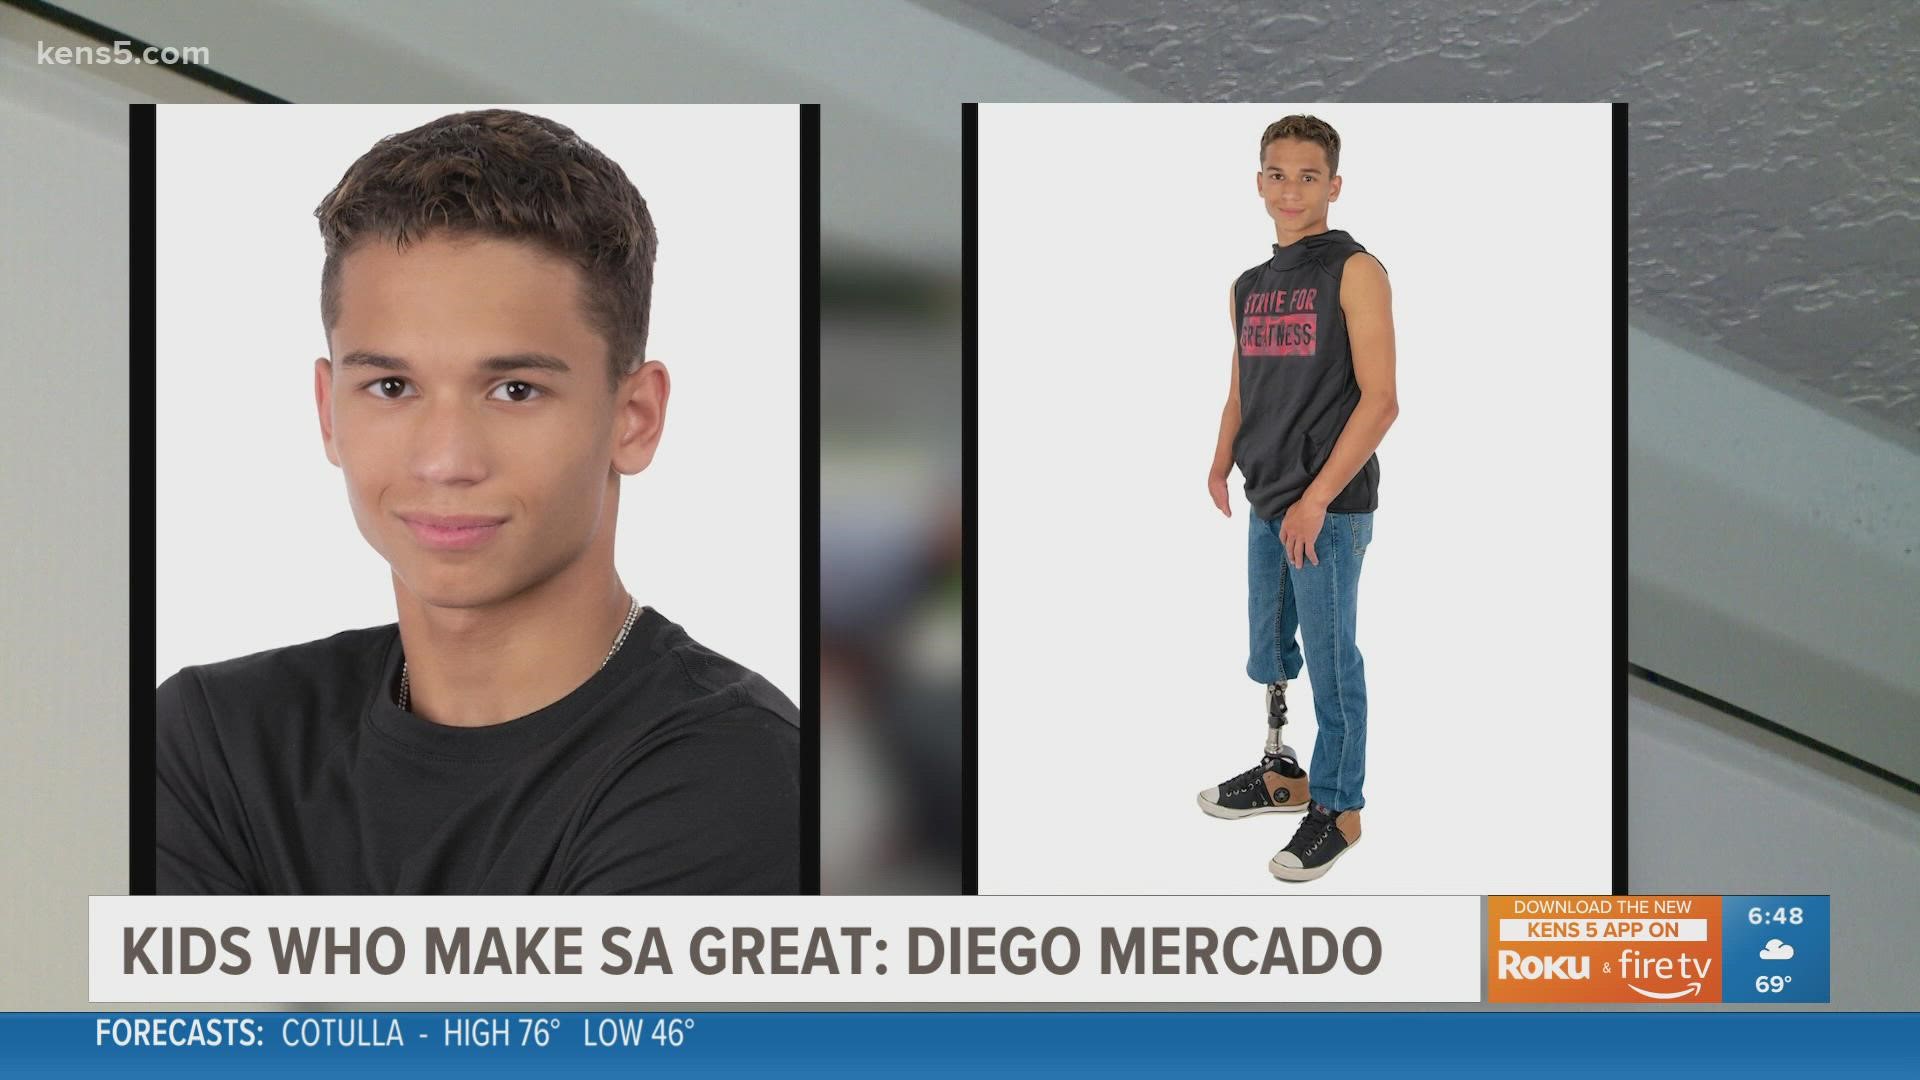 Diego Mercado's first acting gig was a role in the Netflix movie "Mixtape." His screen ego was someone the teen battled in real life.